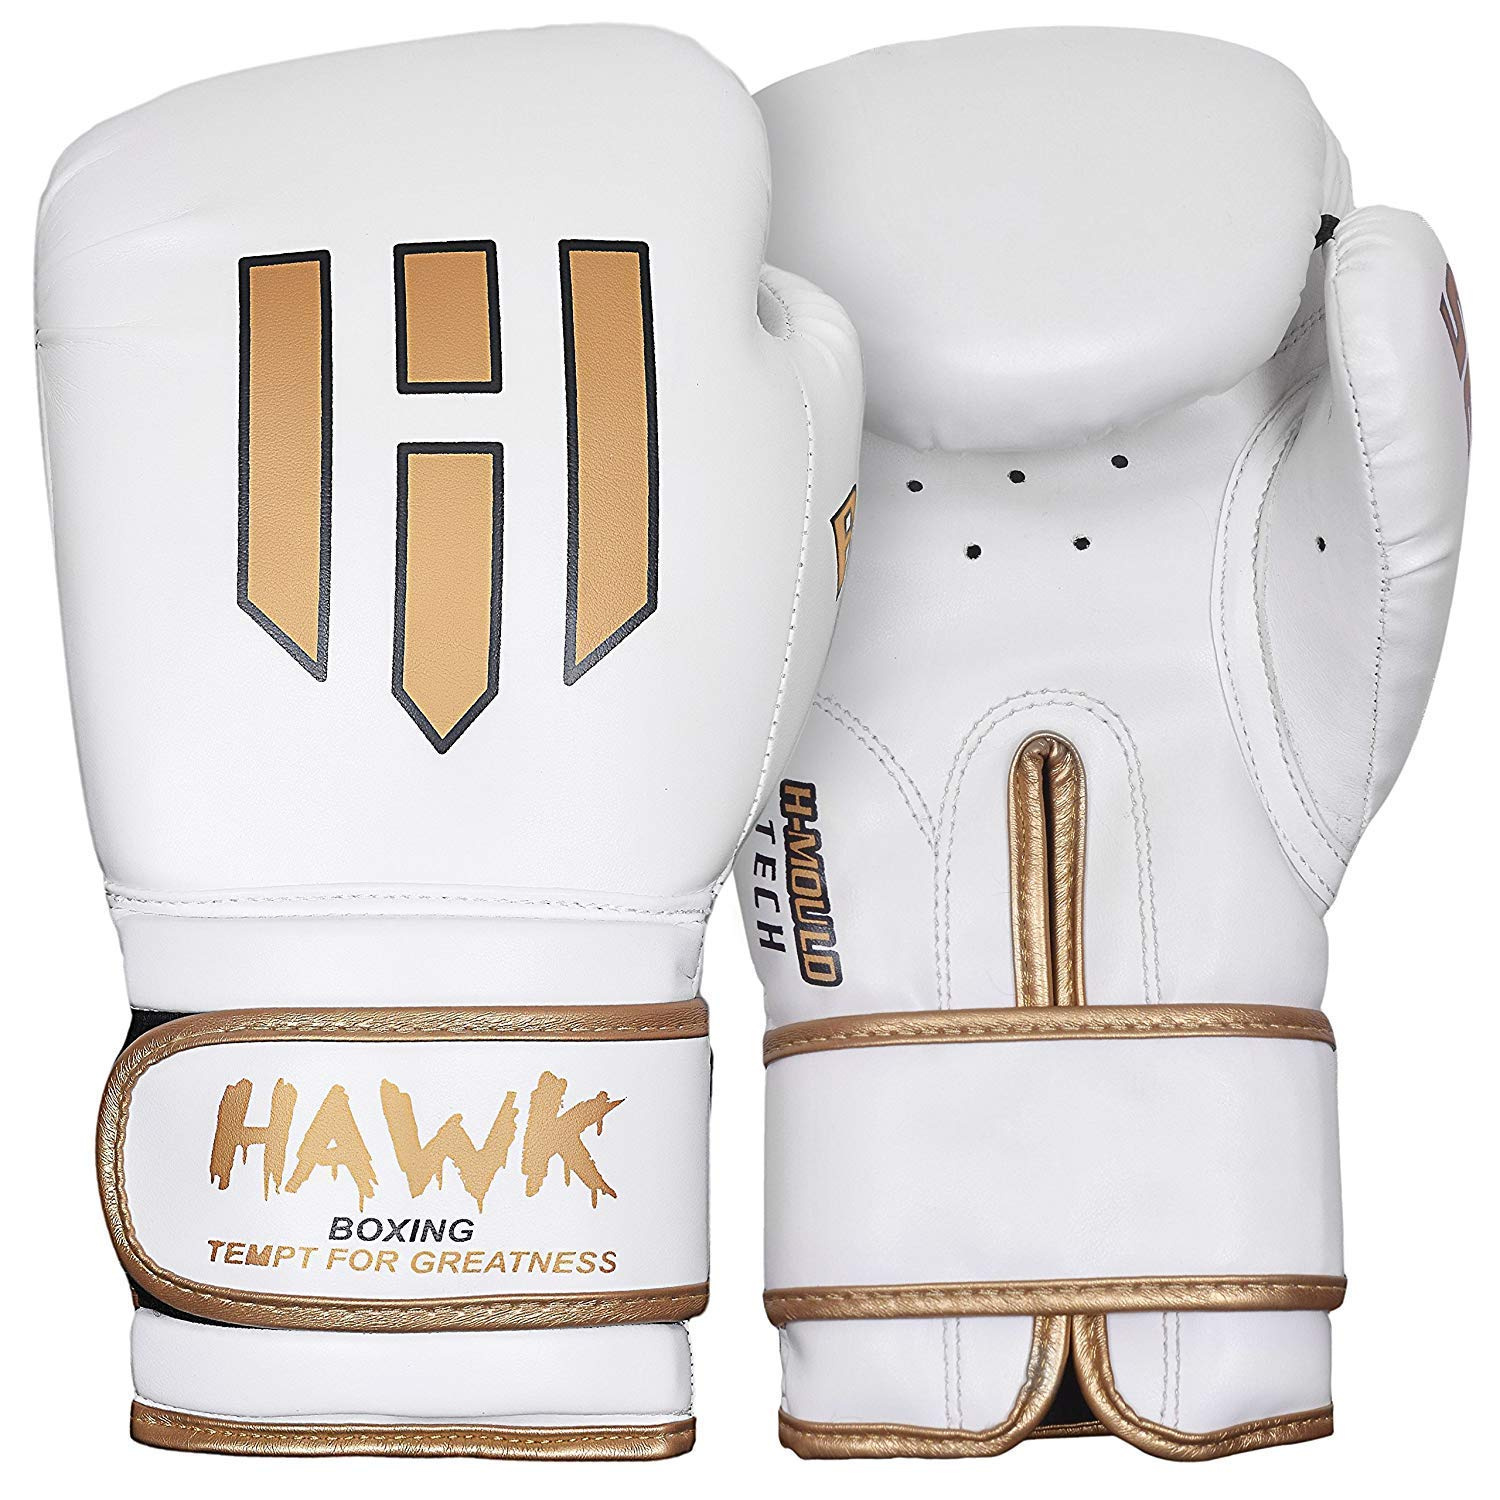 Top-rated  women's boxing gloves for sparring and training. Crafted by Hawk Sports with care using high-quality materials, these gloves deliver optimal comfort, protection, and flexibility. Ideal for female boxers of all skill levels.